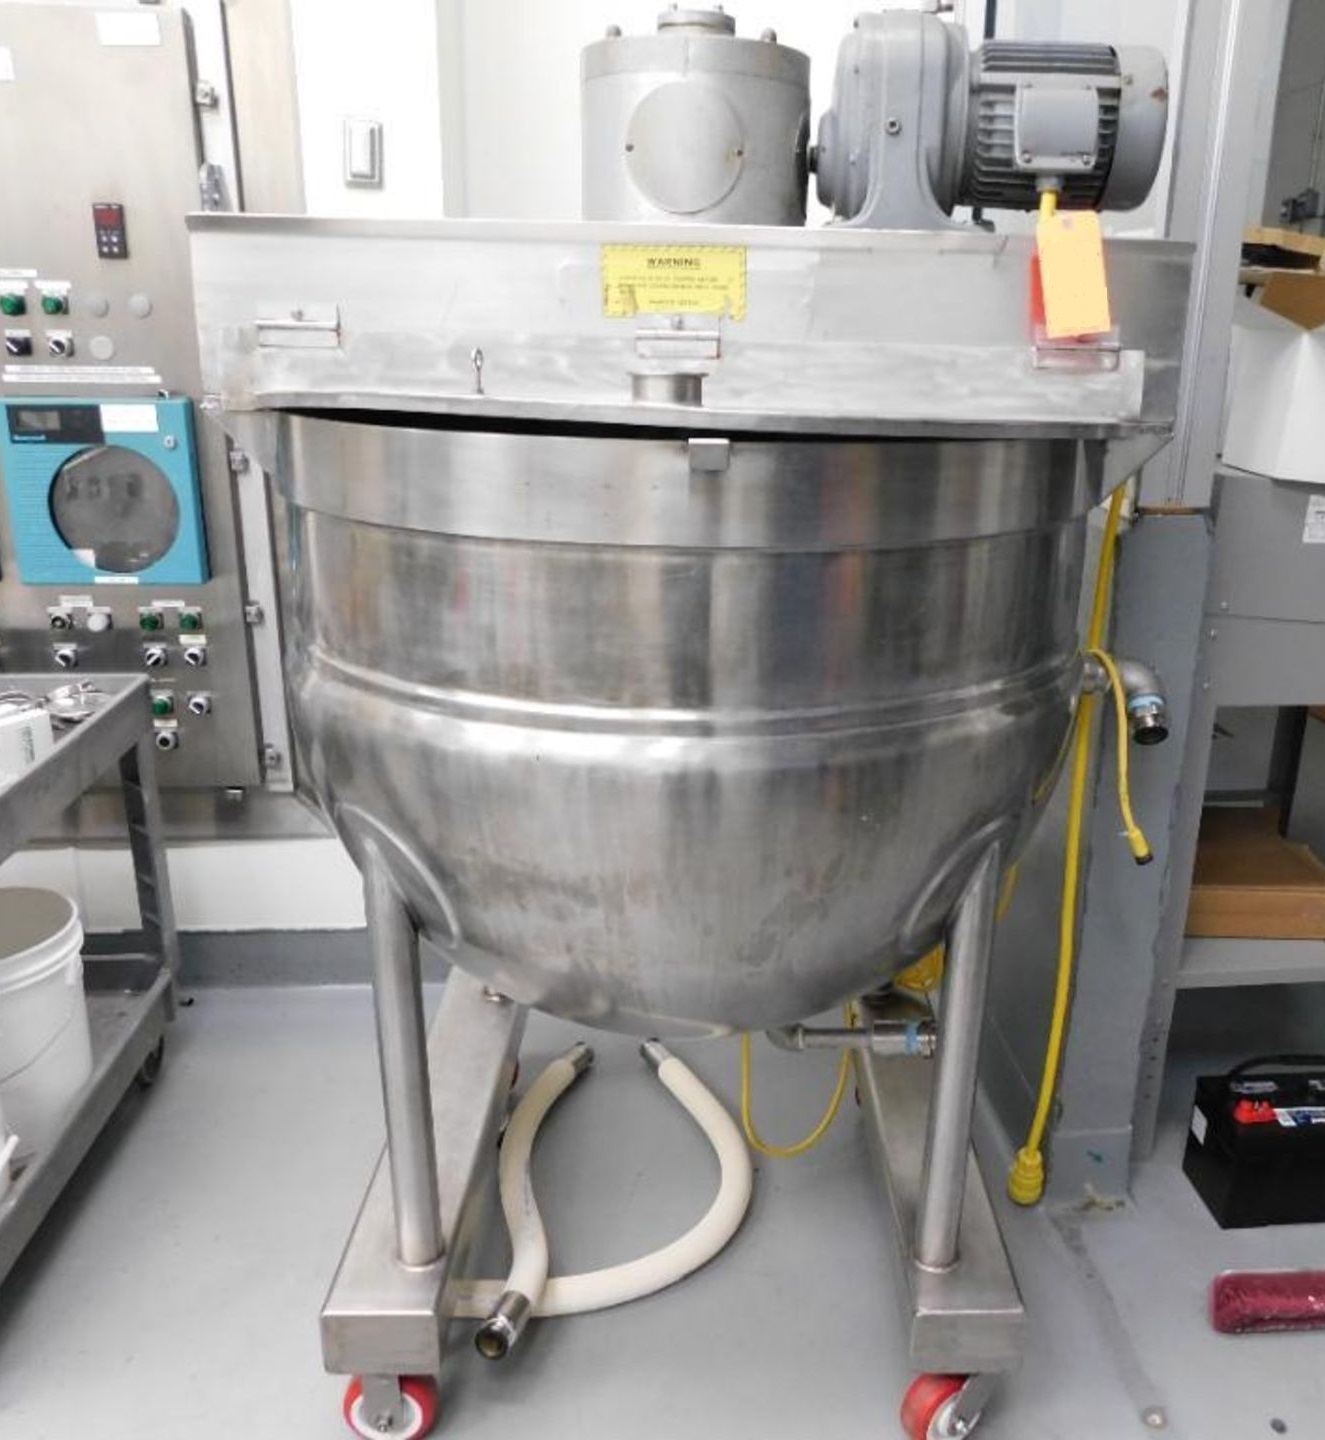 150 Gallon Jacketed Double Motion Mix Kettle.  Built by JC Pardo.  Rated 125 PSI @ 350 Deg.F. Portable on wheels.  Hinged lids.  No scrapper blades installed.  Unit has been tested and is ready to go. Last used in Sanitary Pharmaceutical application.